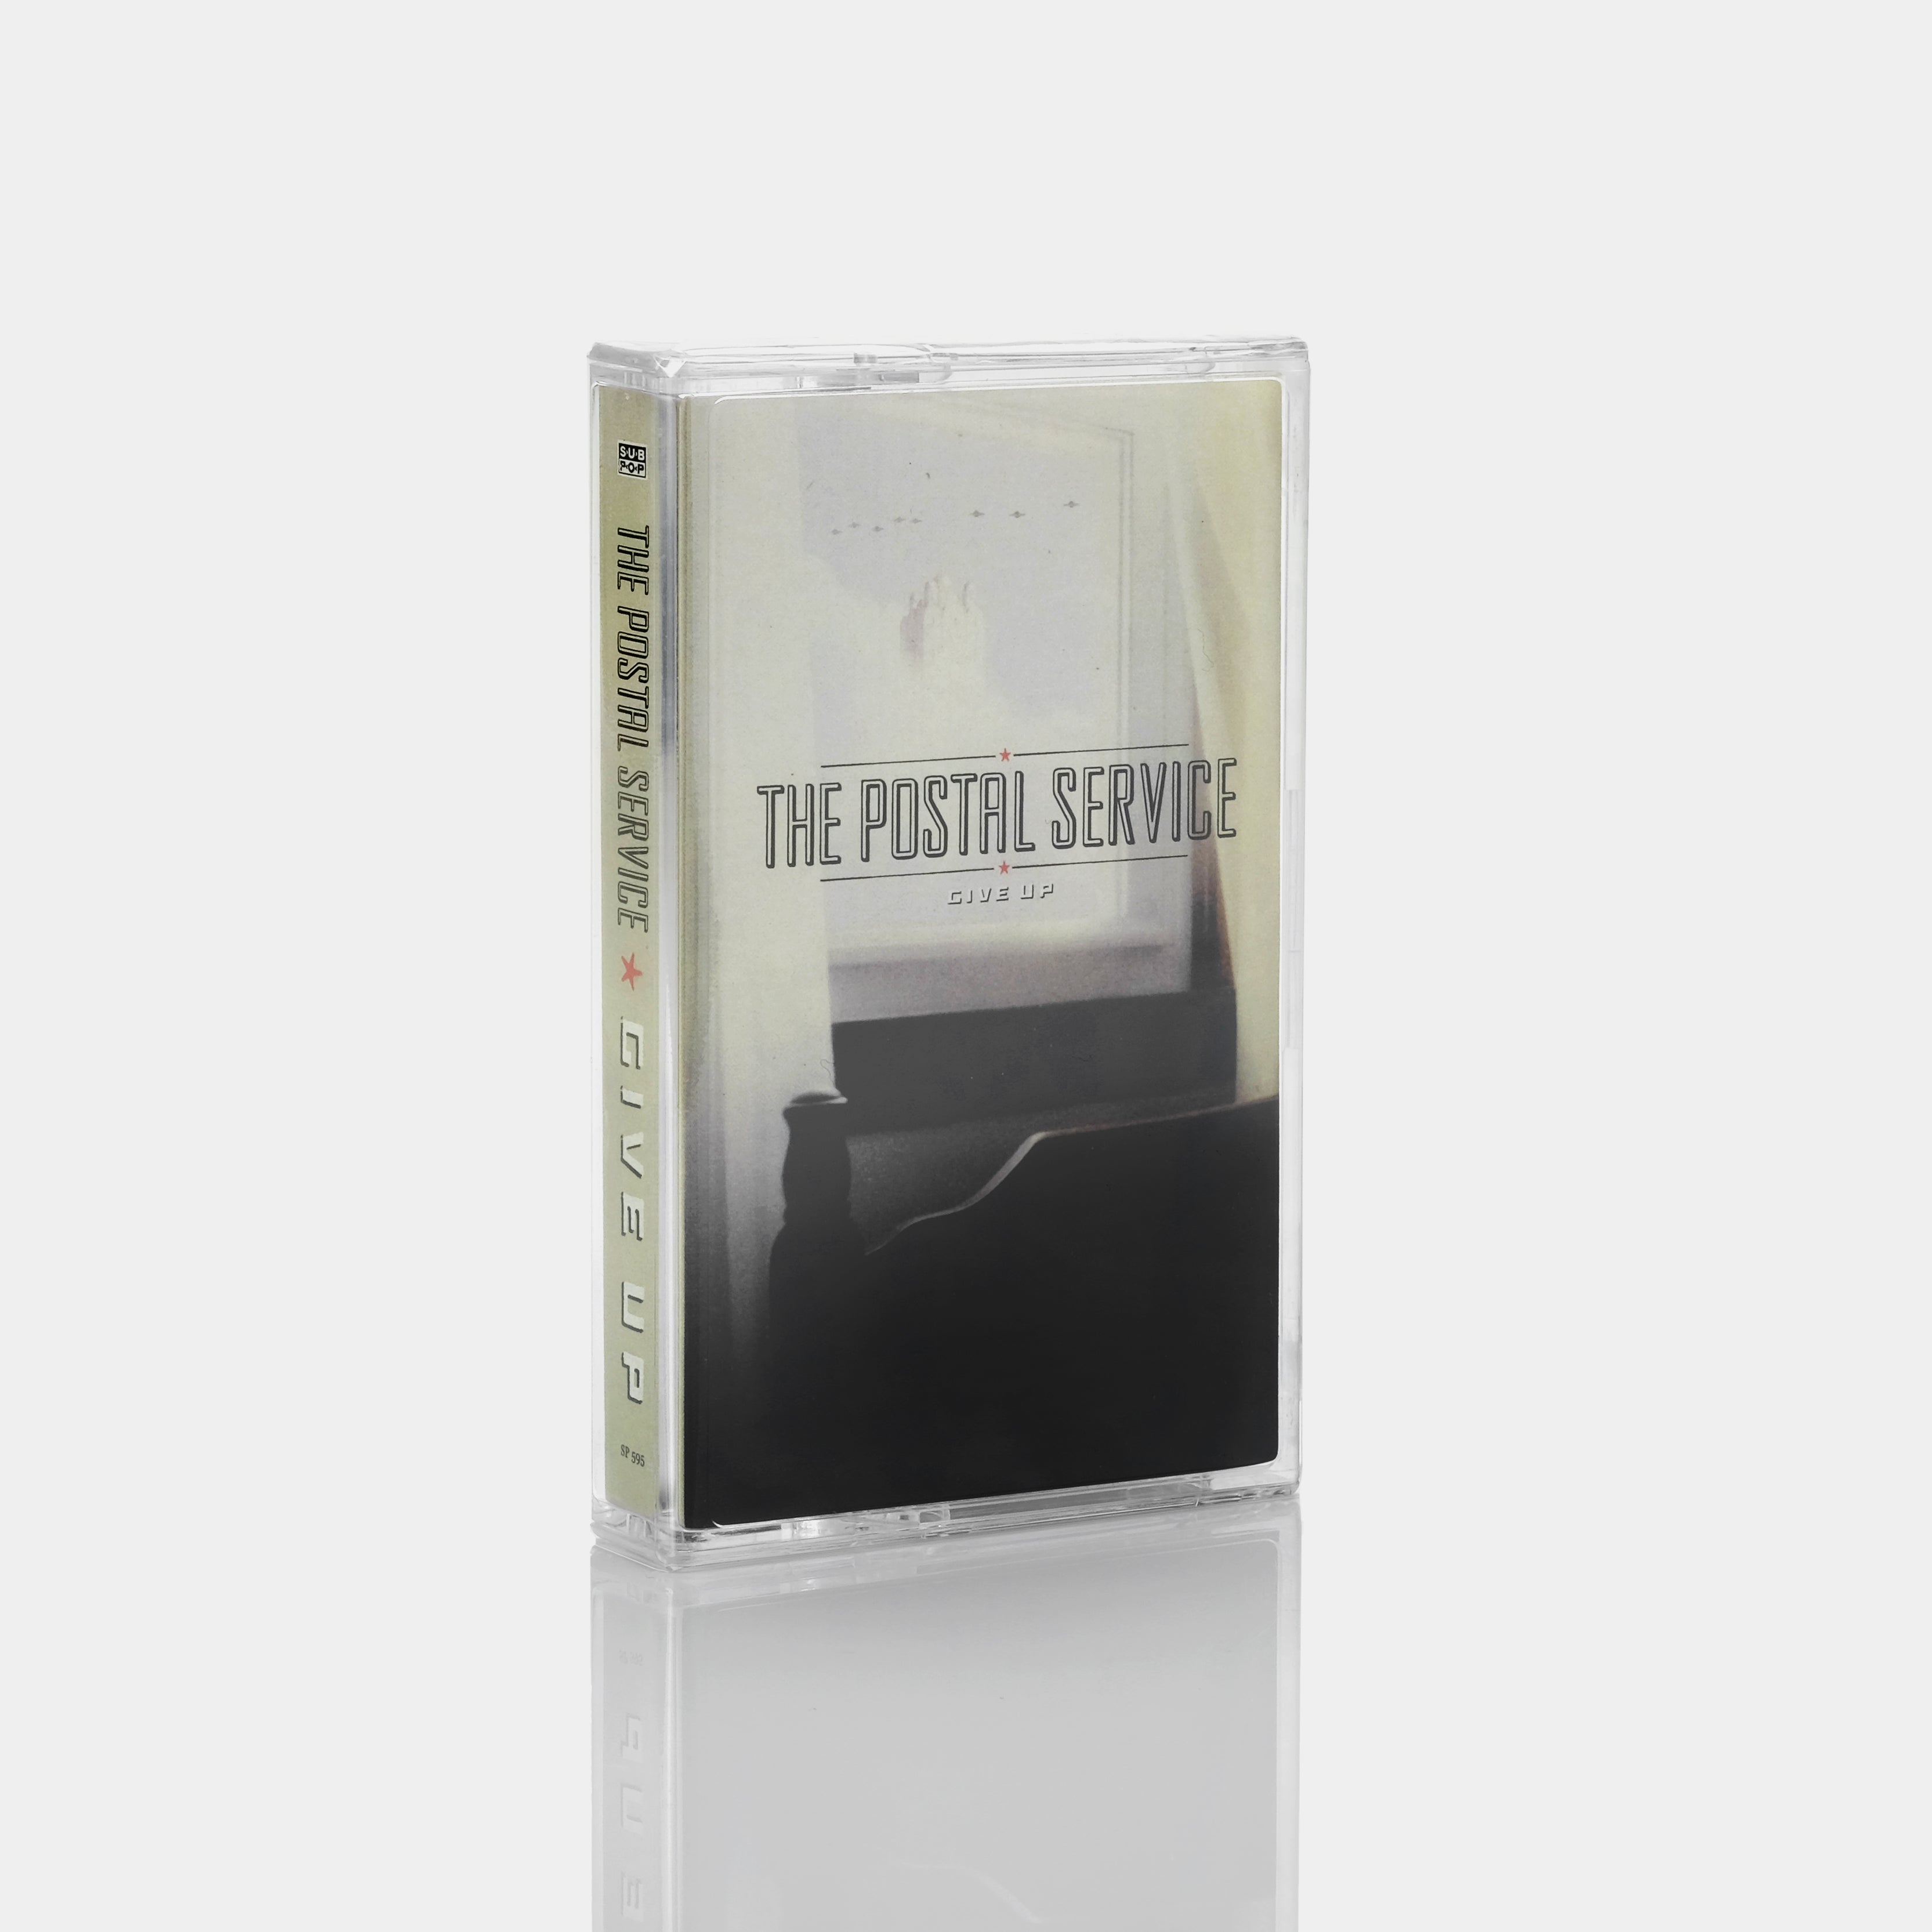 The Postal Service - Give Up Cassette Tape